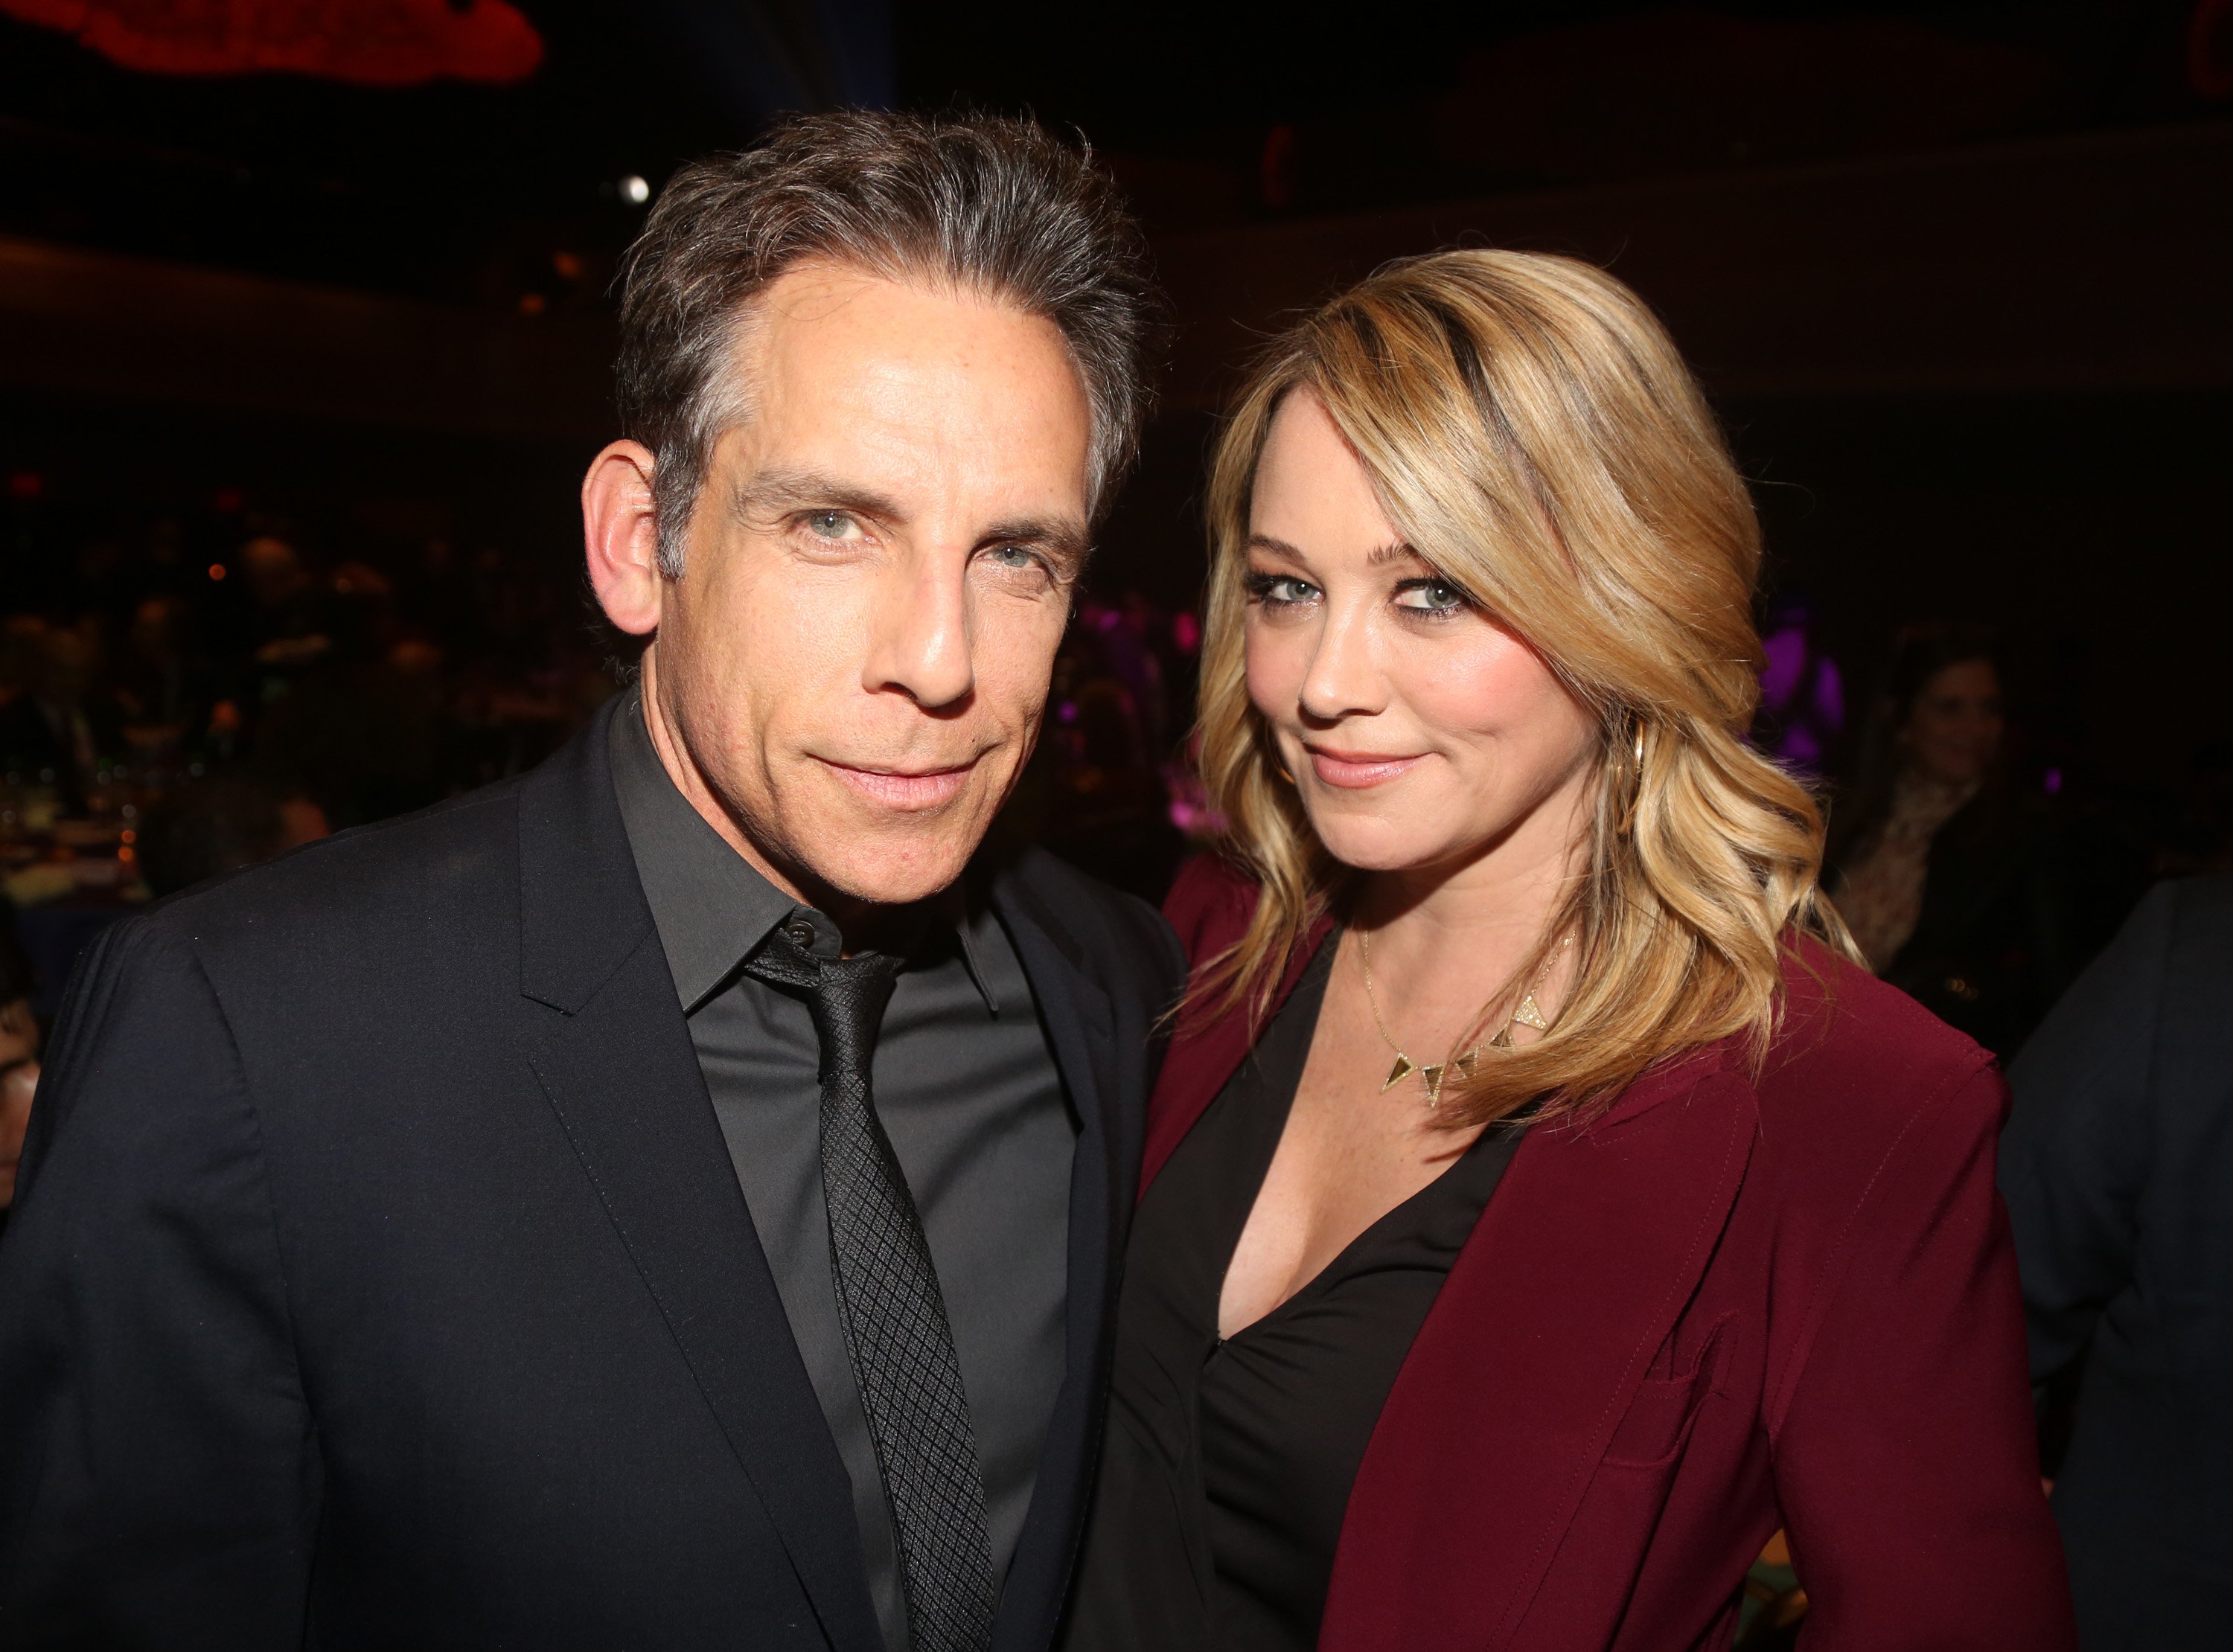 Ben Stiller and Christine Taylor pose together at an event in New York City